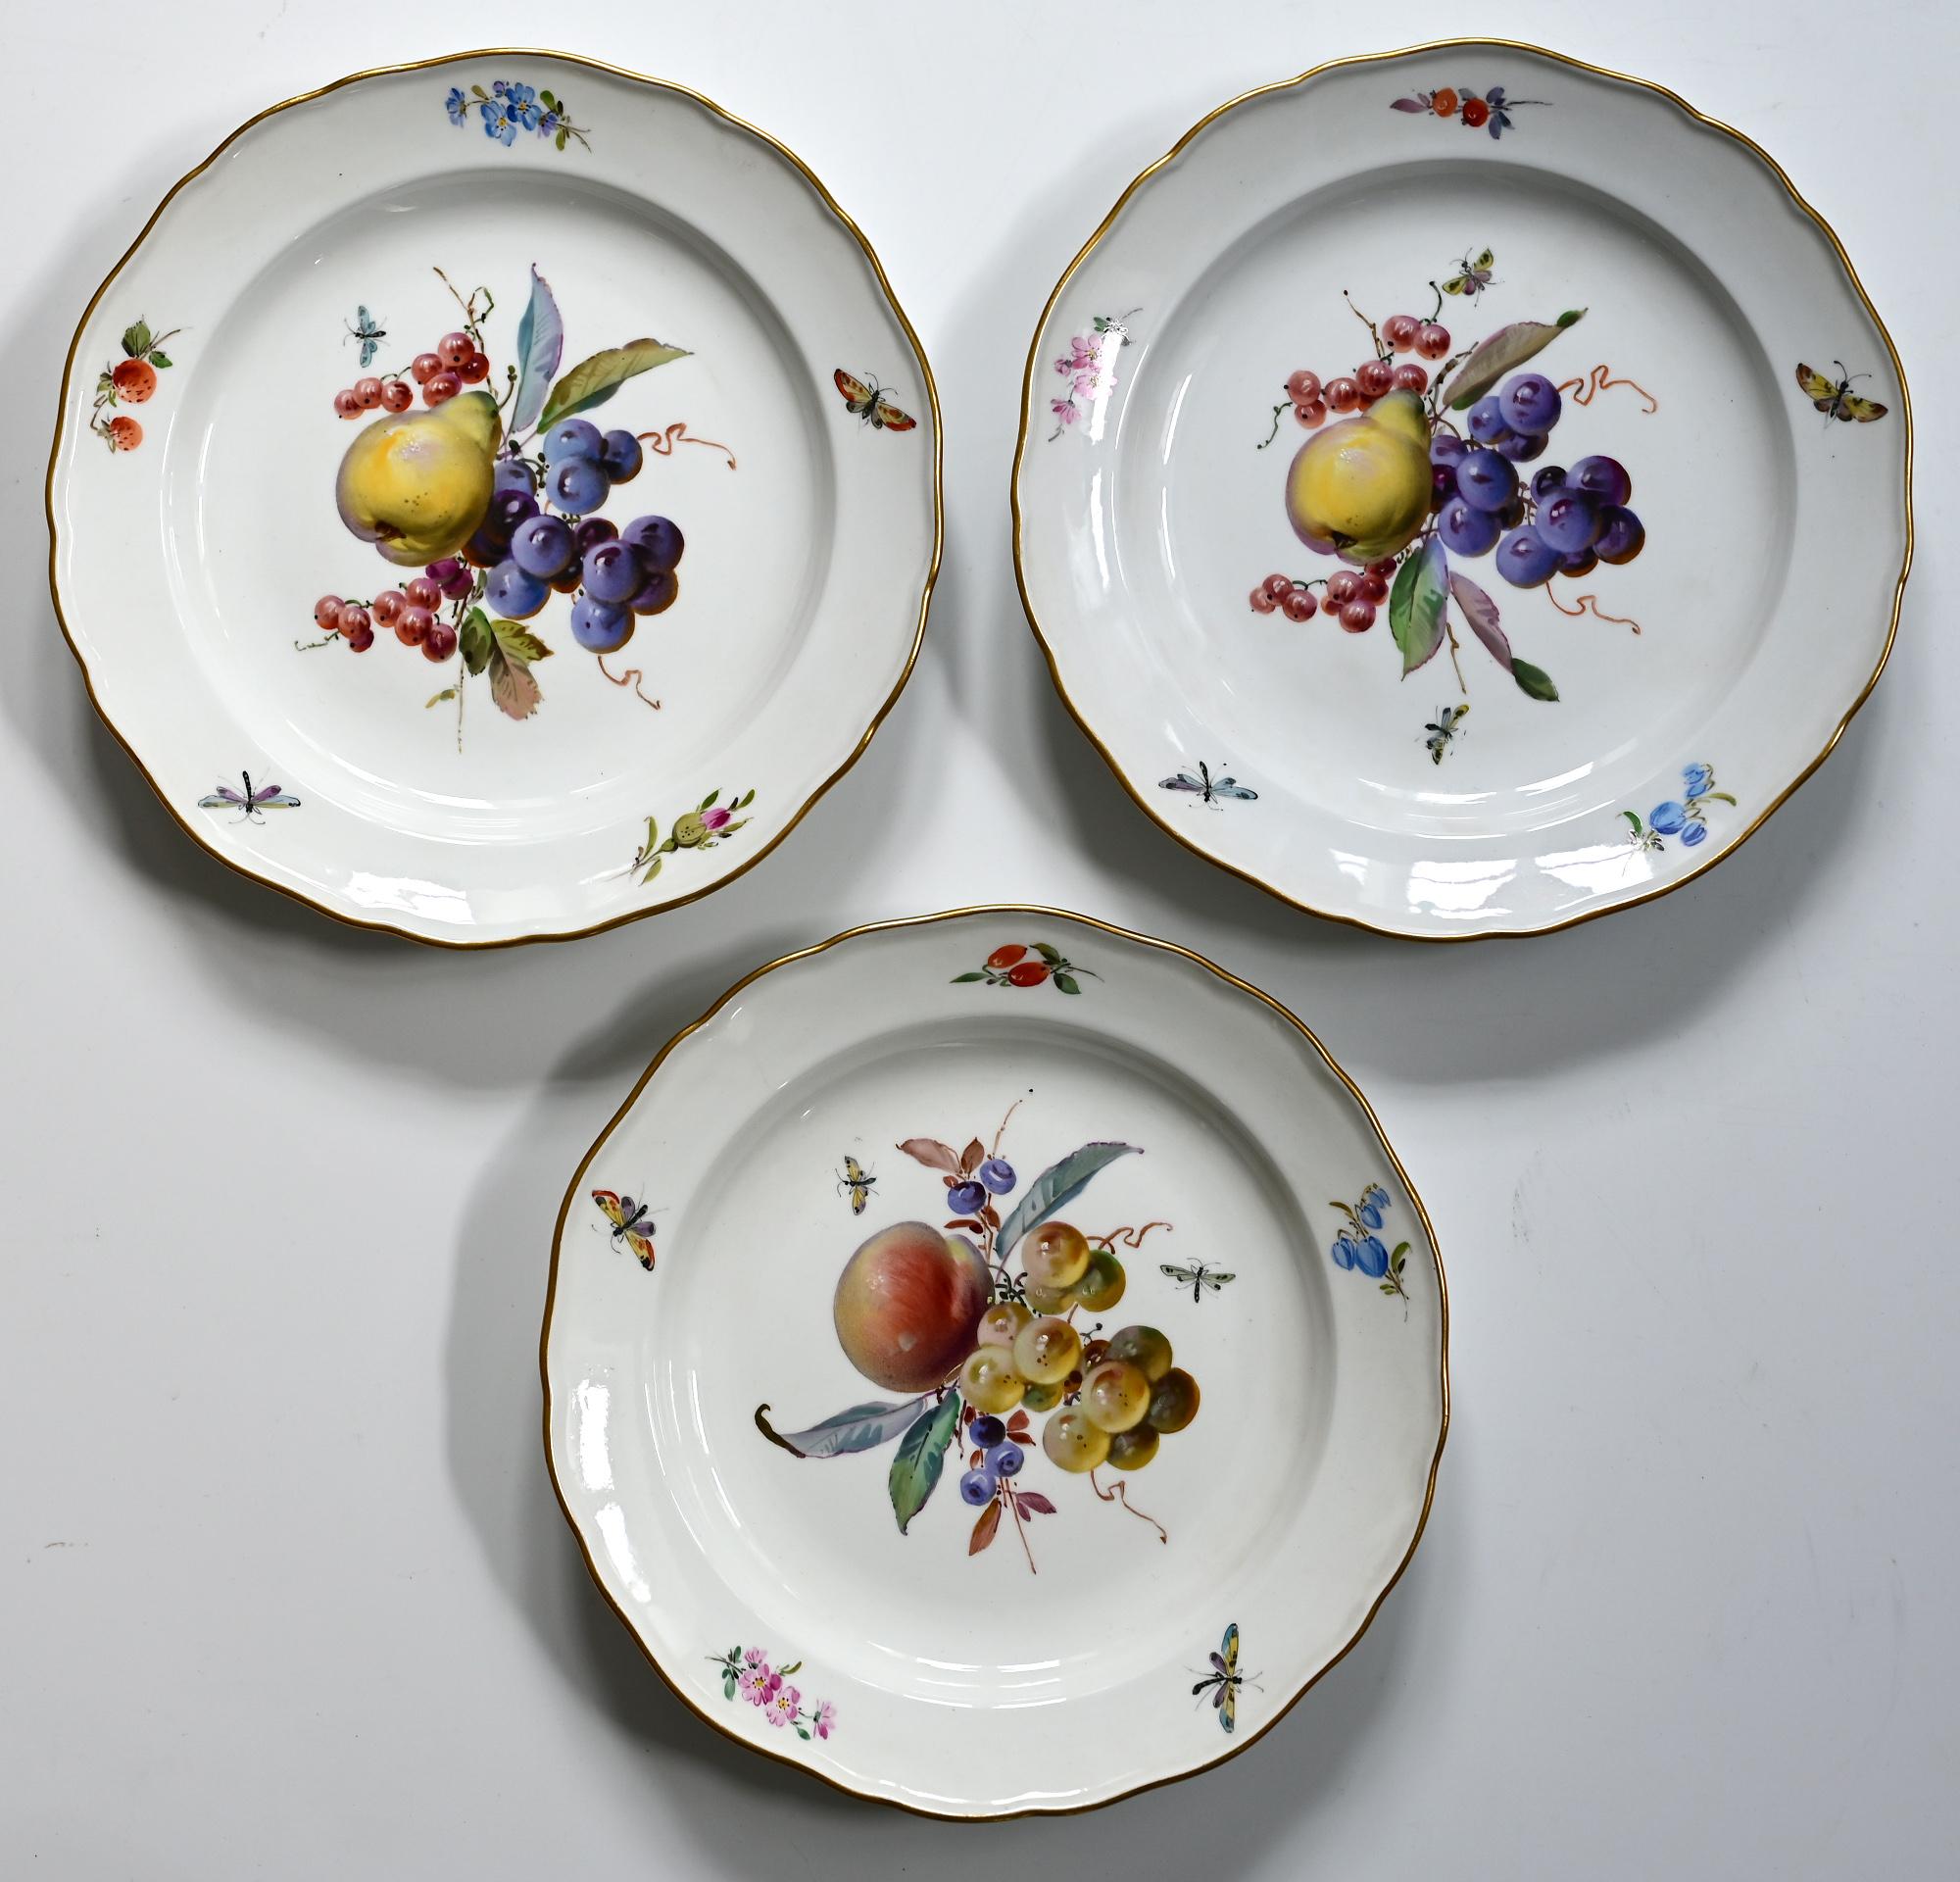 Fired Set of 12 Meissen Plates with Fruits, Insects and Flowers 19.Jhdt Porcelain